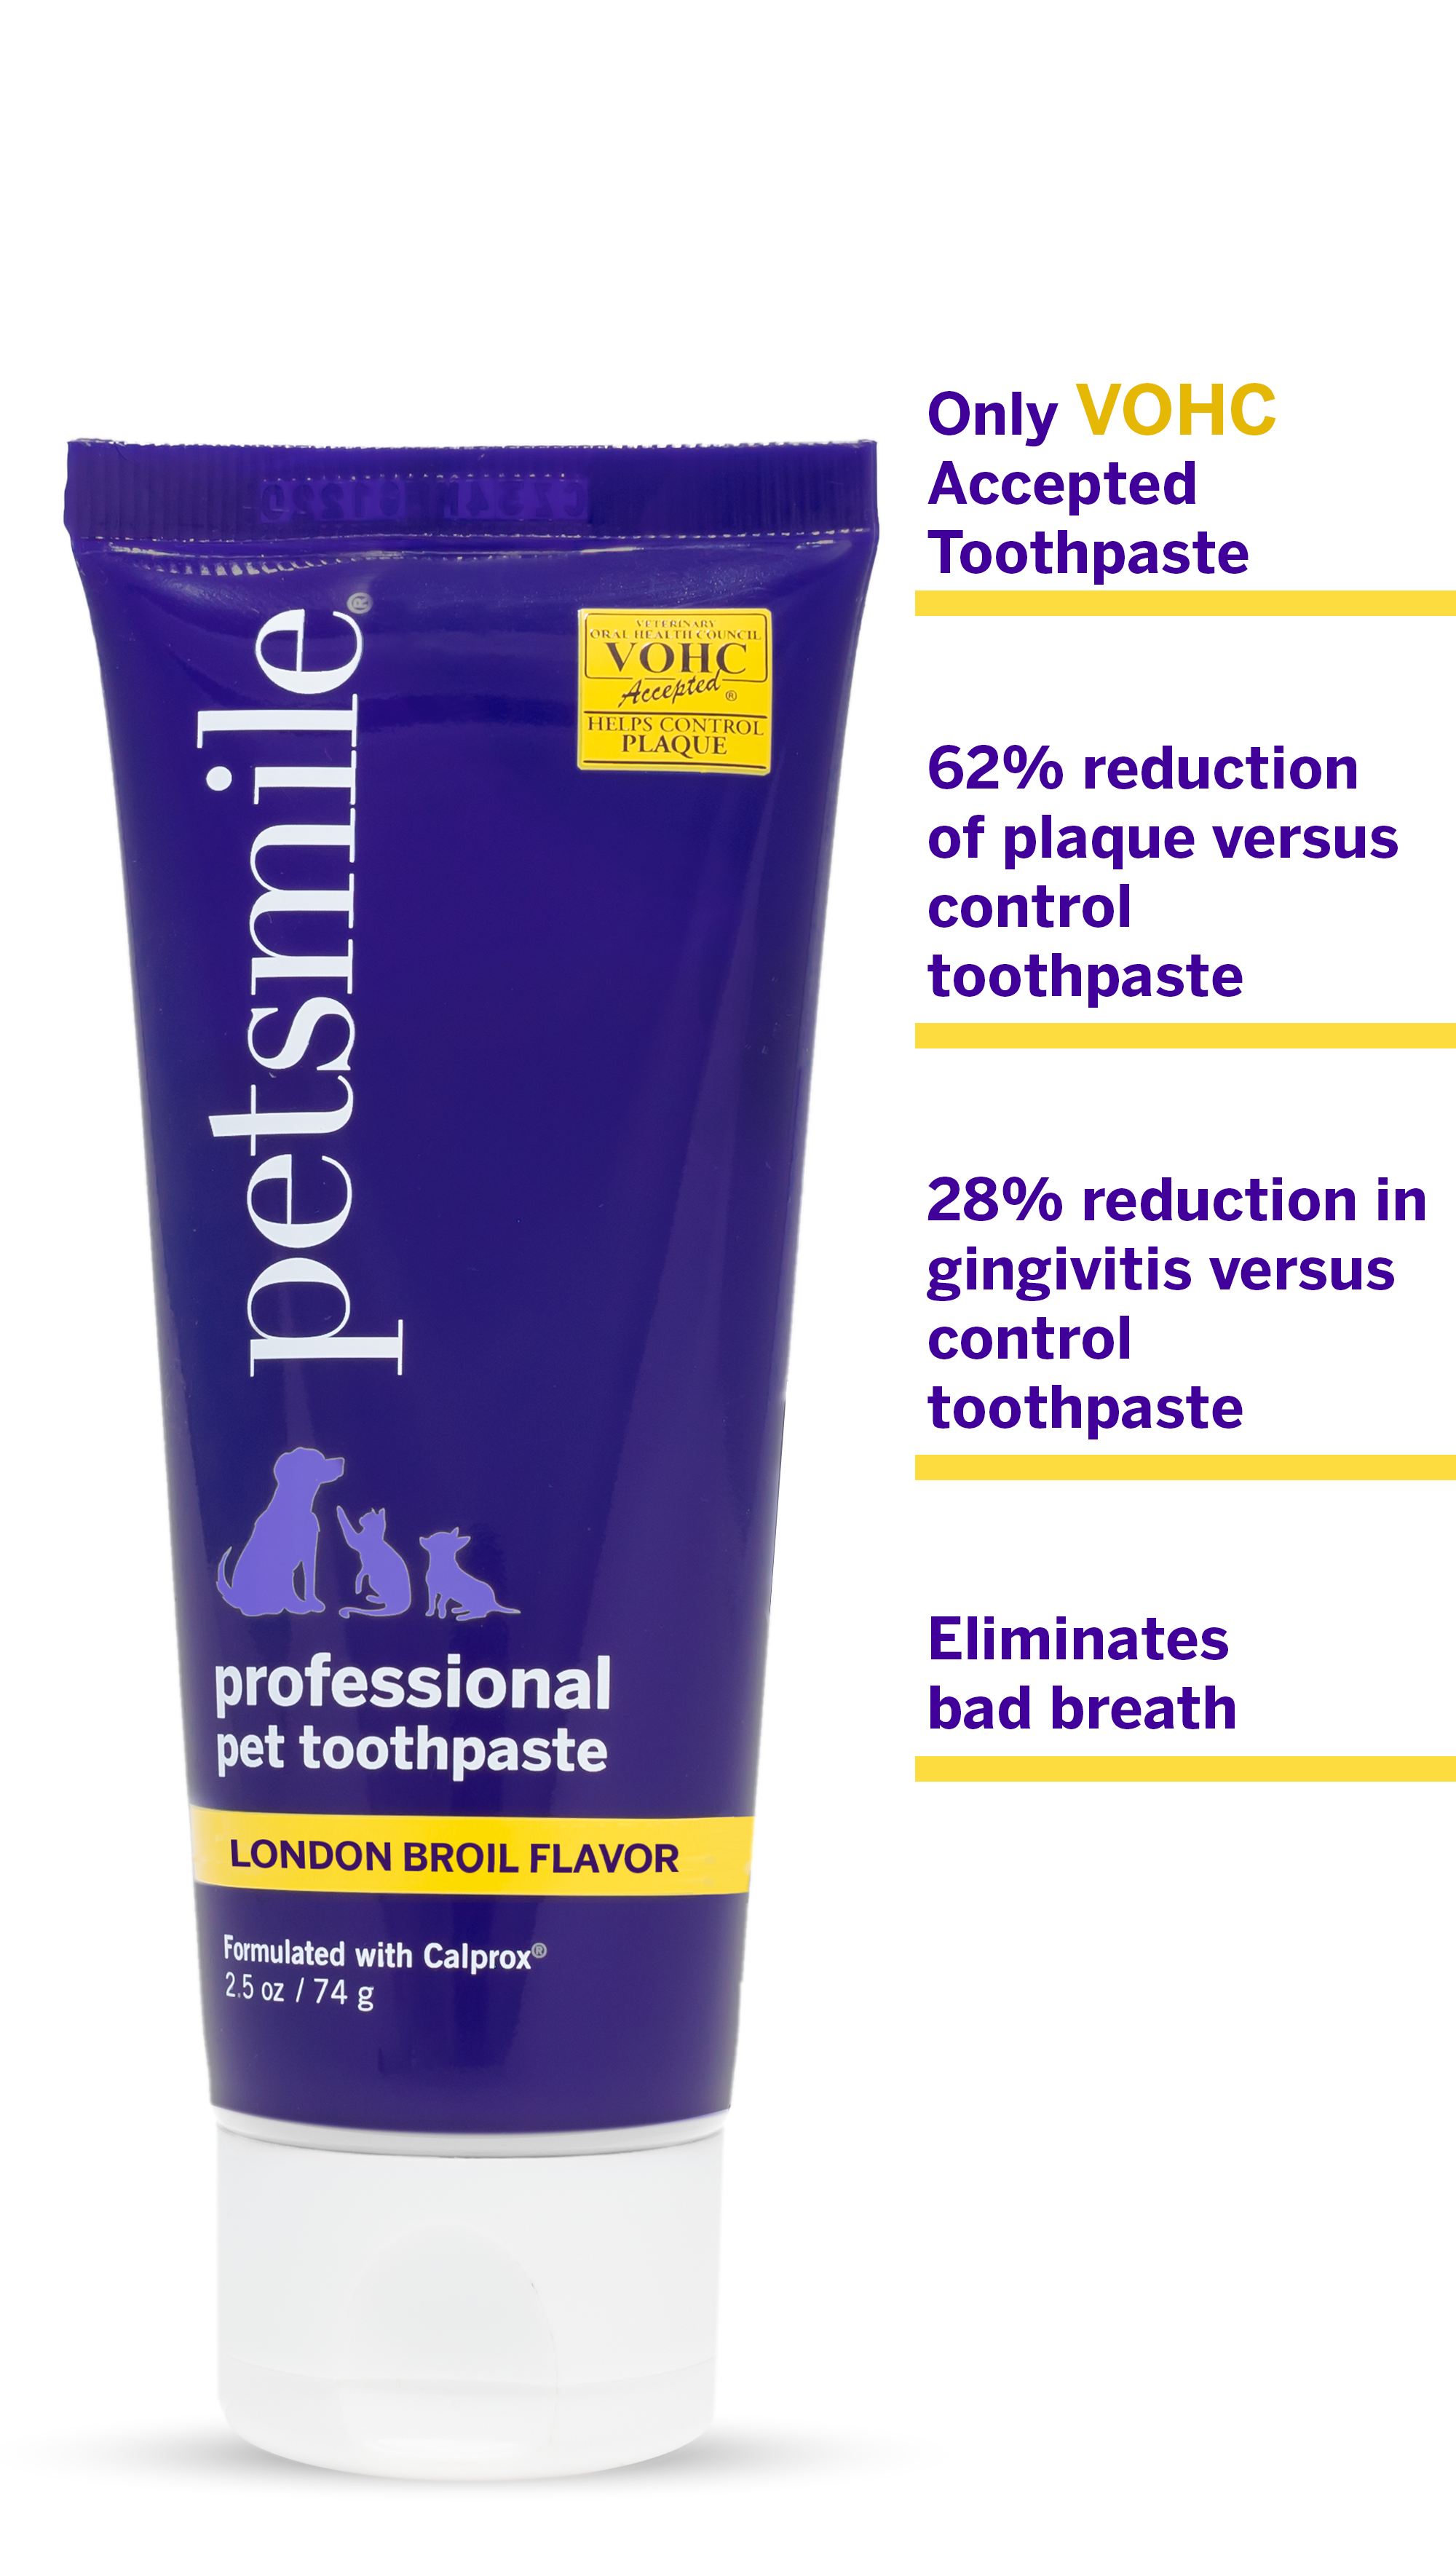 VOHC approved, London Broil flavor , Small bottled petsmile toothpaste in London broil flavor , 62% greater in plaque reduction, 28% greater in gingivitis reduction , Professional-grade brush and toothpaste combo , petsmile dental care for professional results